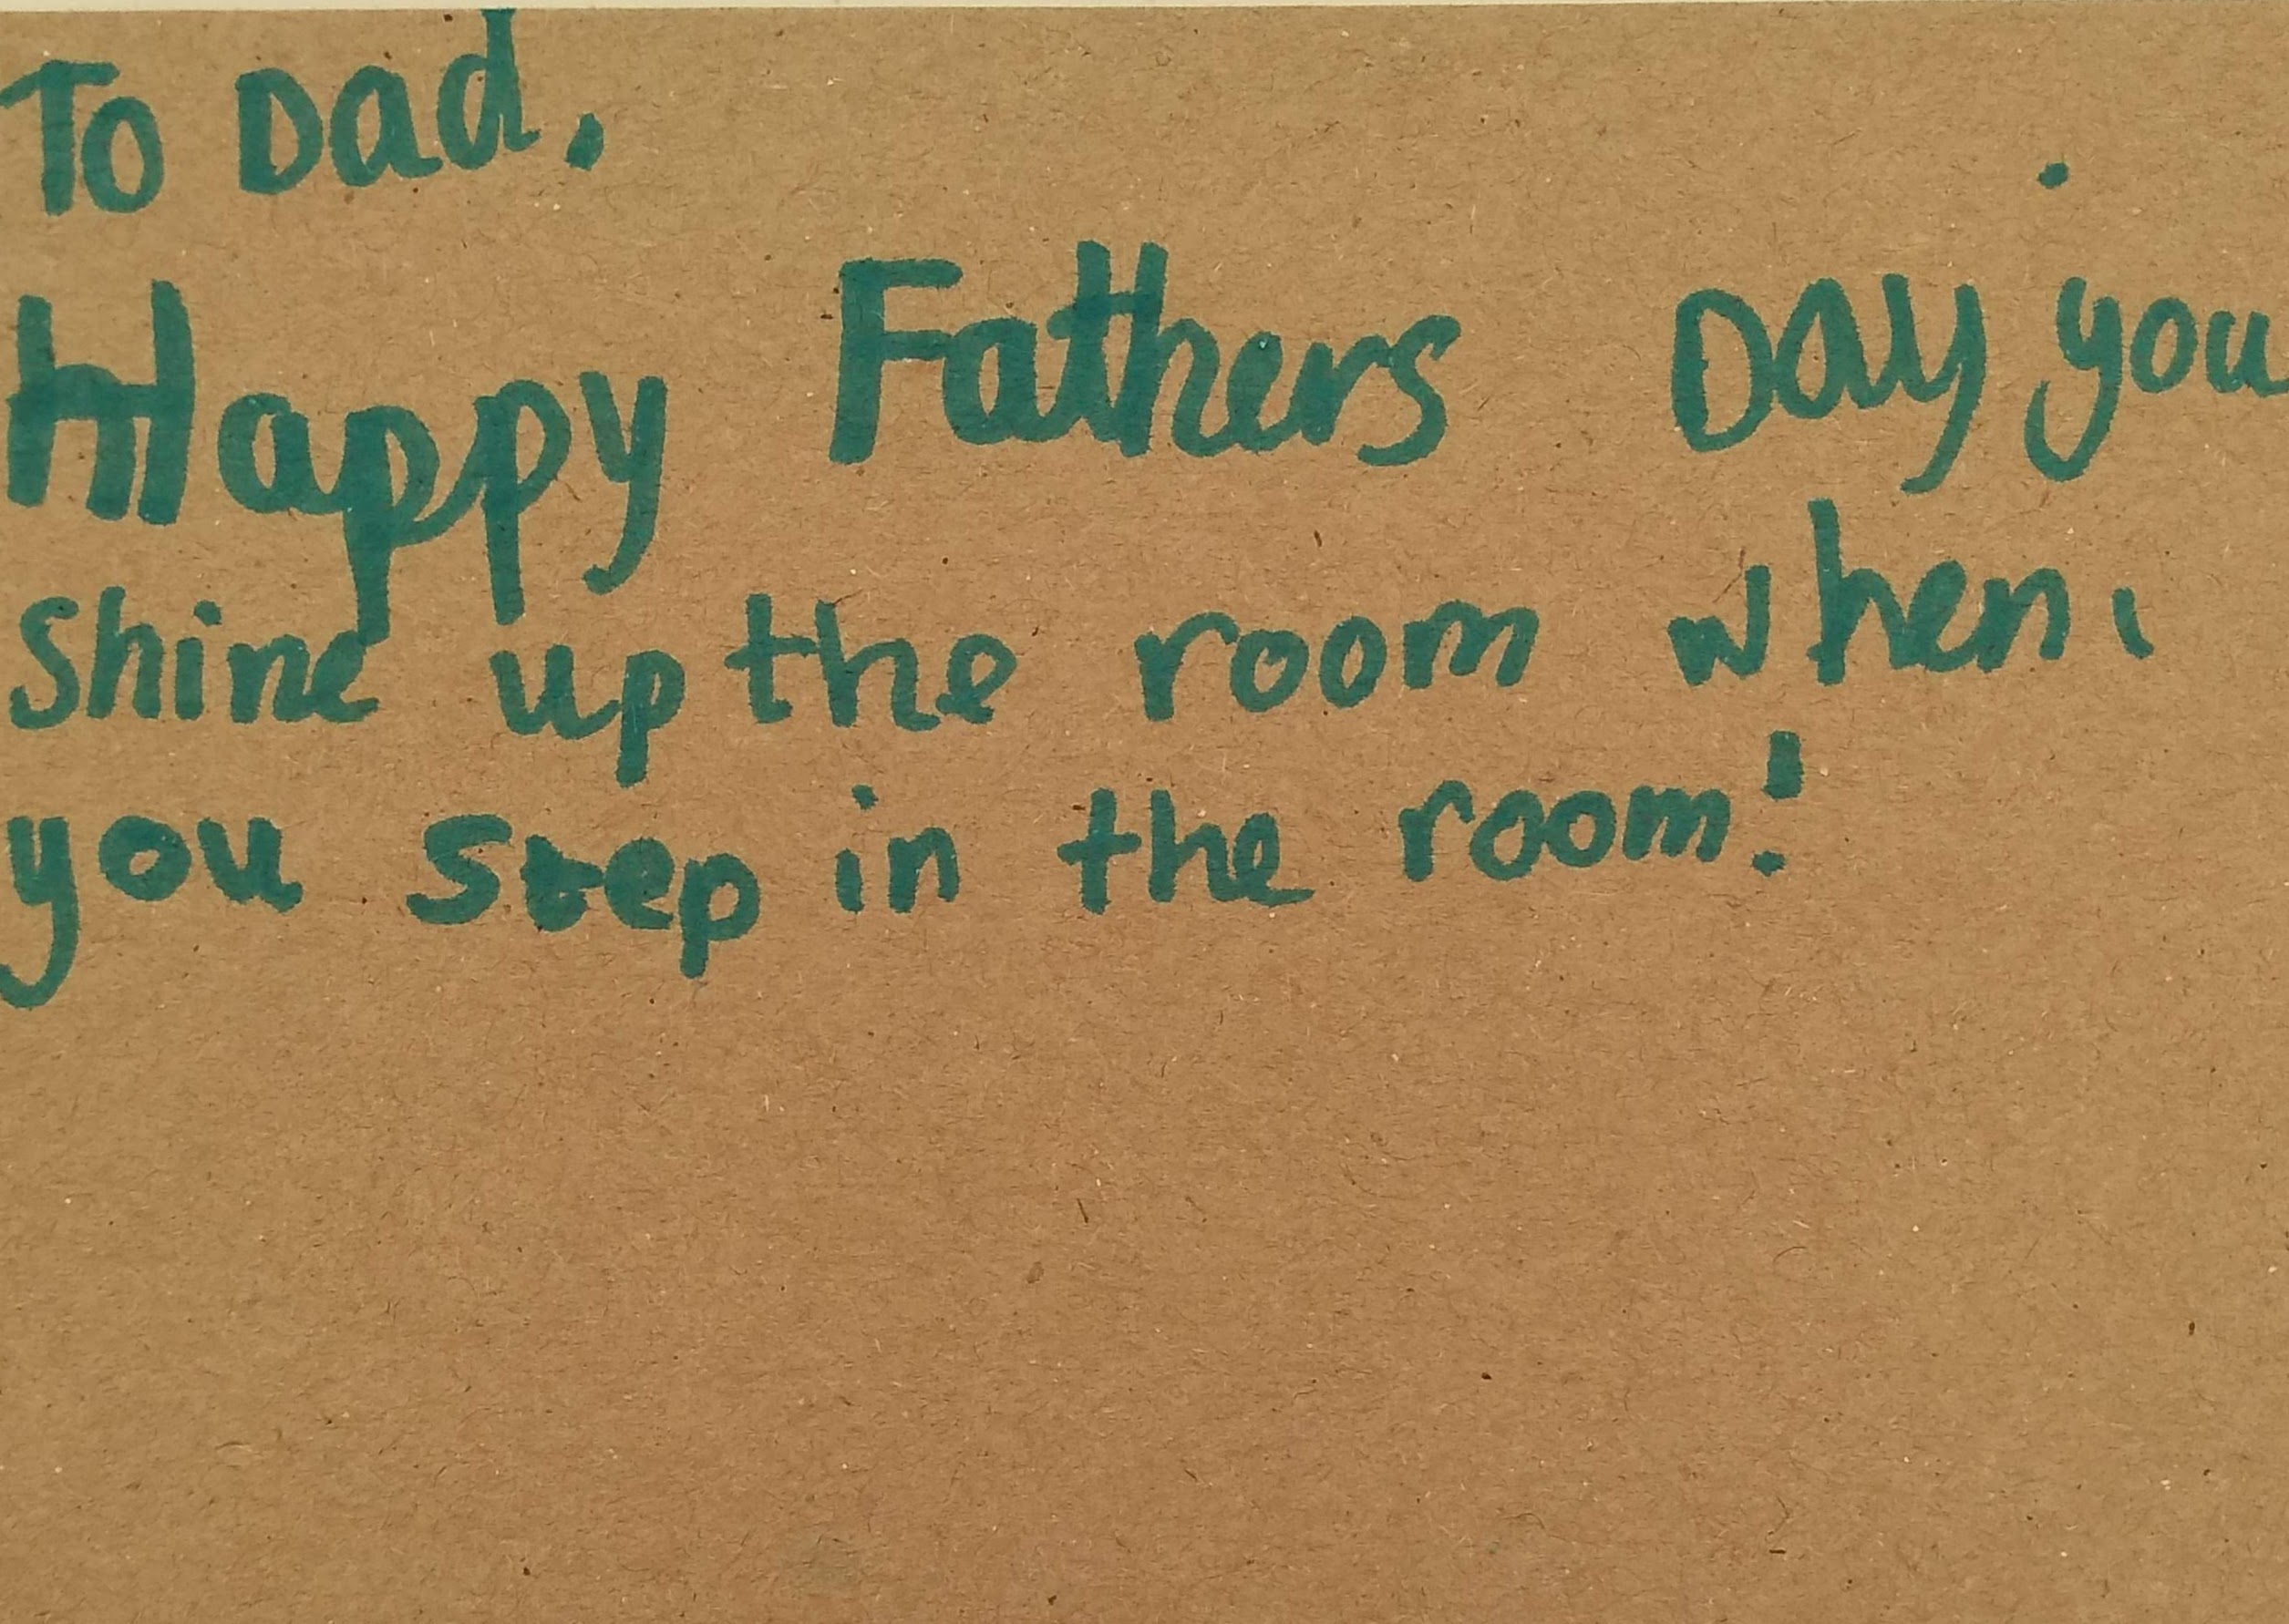 To Day Happy Fathers Day you shine up the room when you step in the room!